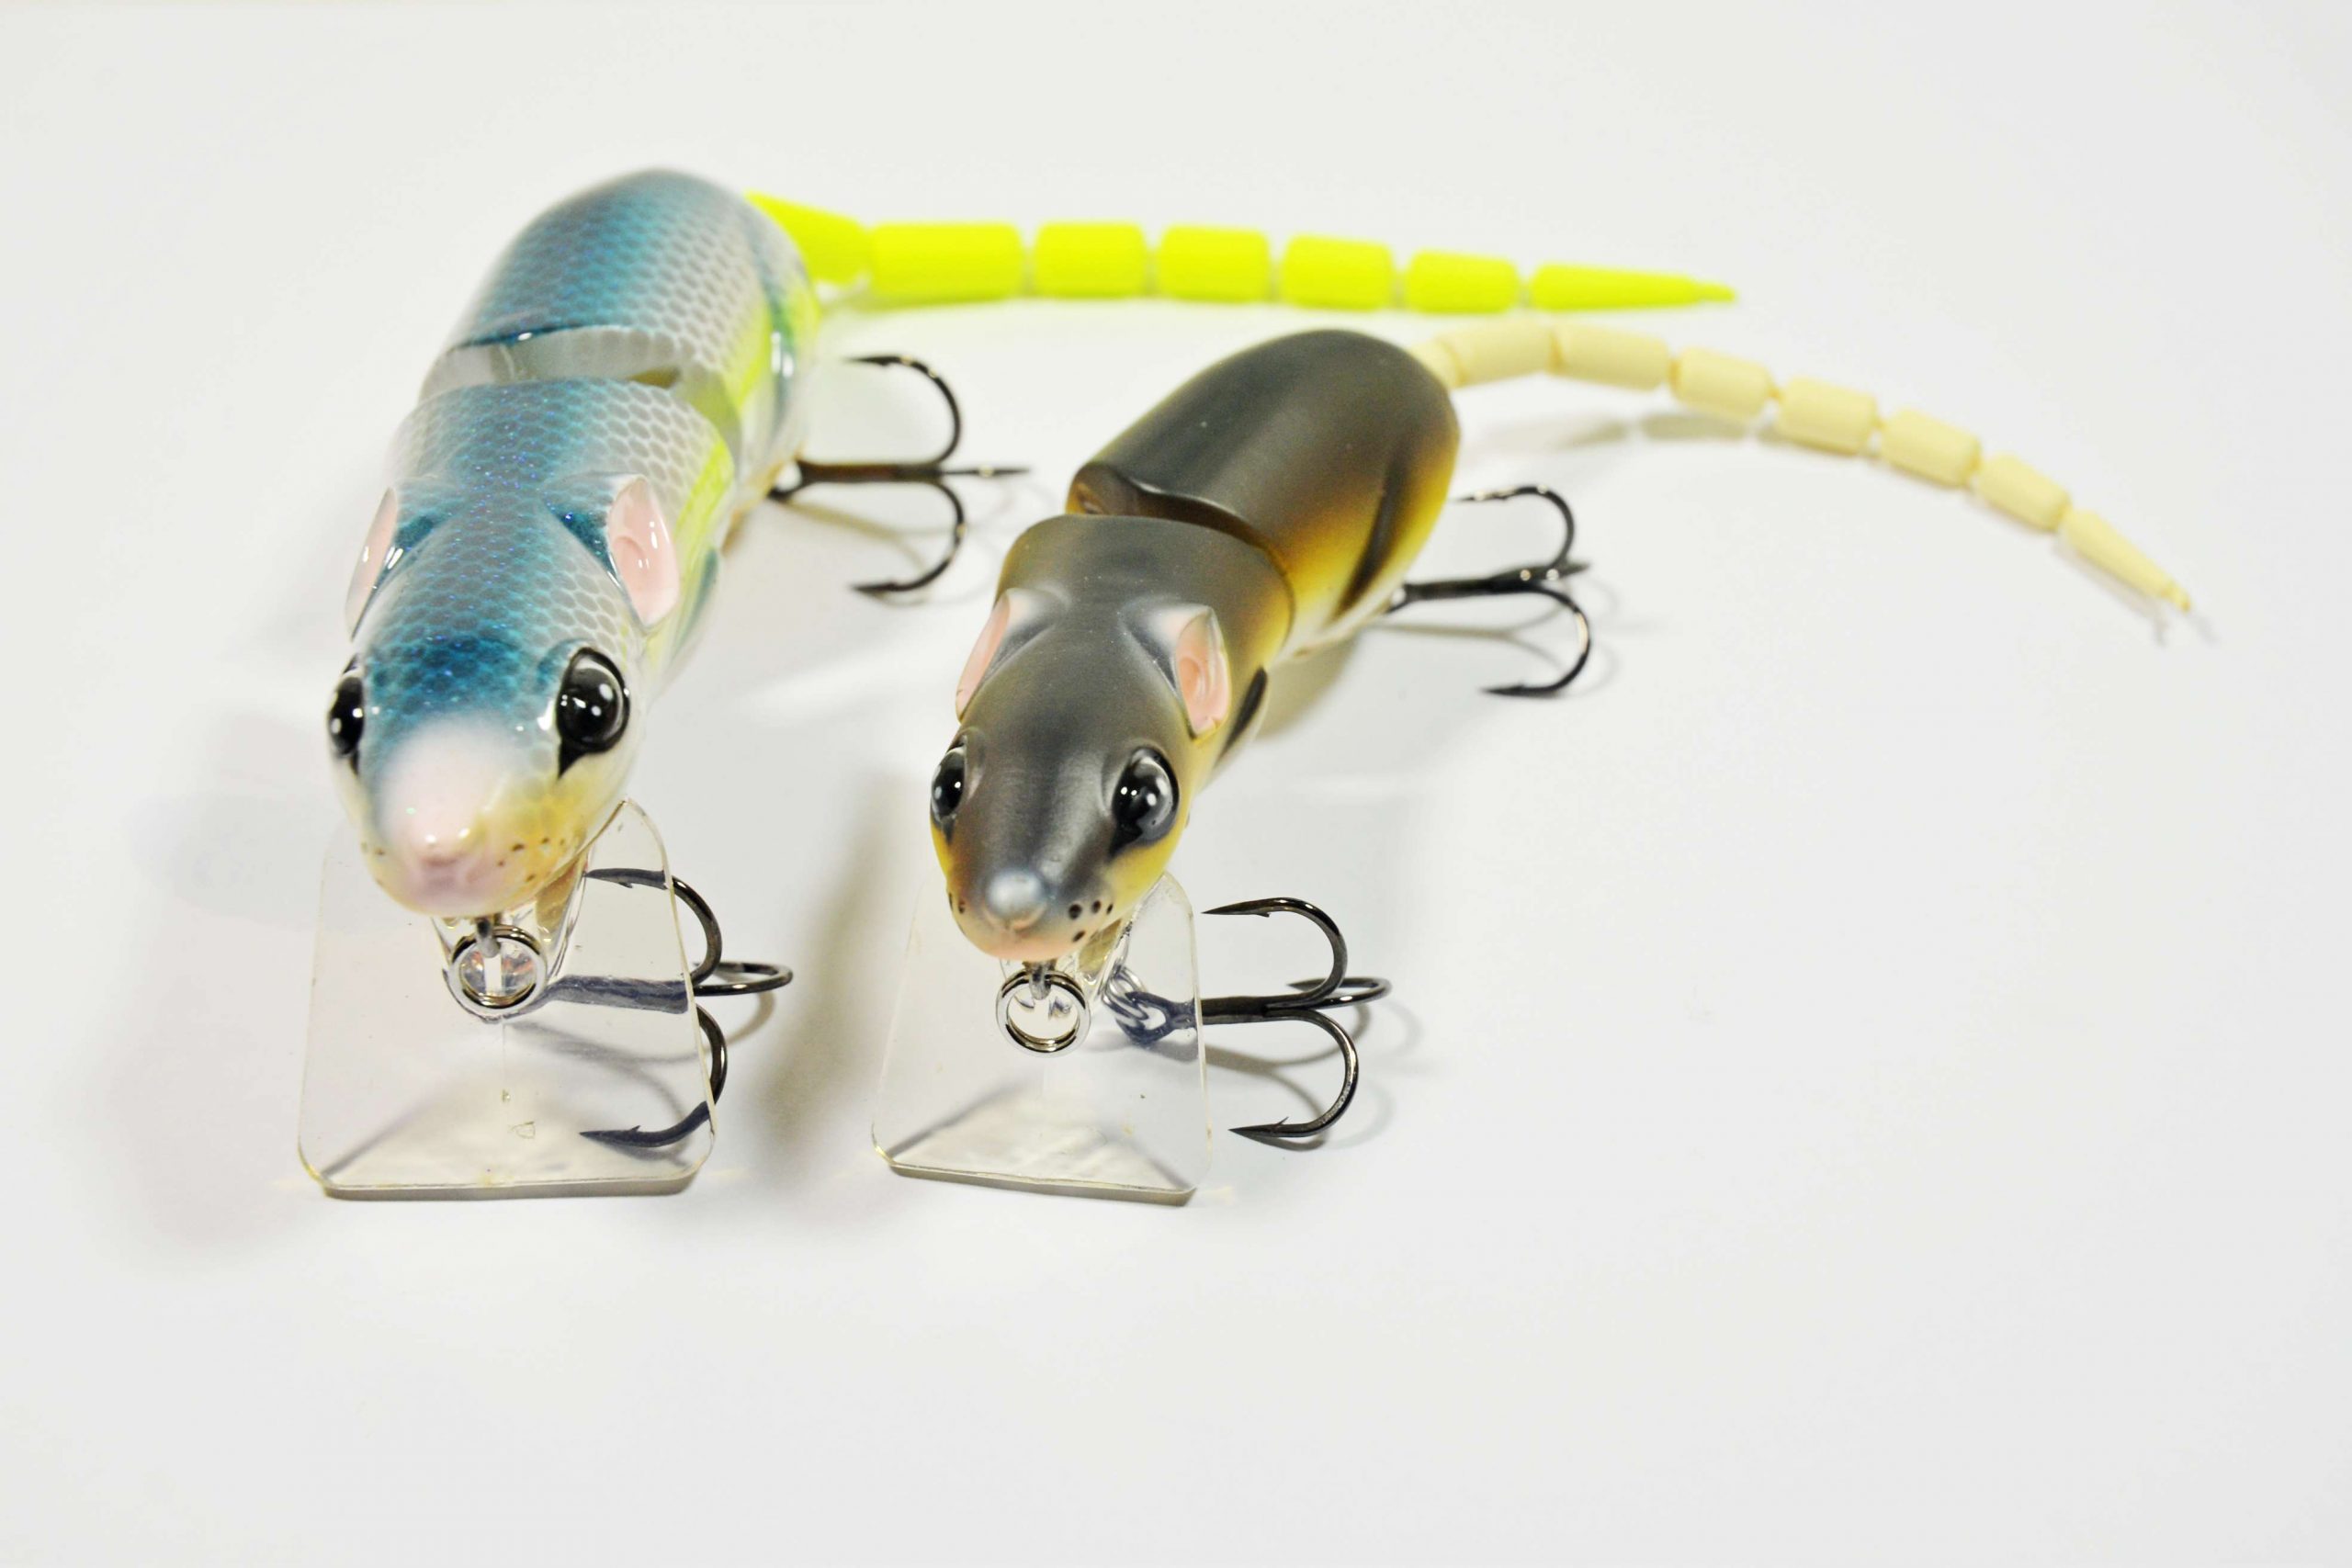  <b>Spro BBZ-1 Rat 40 Jr. & Rat 30 Baby:</b> The BBZ-1 Rat 40 Jr. is 4 inches long, weighs 1 ounce and comes rigged with 2 No. 3 Gamakatsu treble hooks. Also added to the lineup is a BBZ-1 Rat 30 Baby, which is 3 1/4 inches long, weights in at 1/2 ounce, and comes equipped with 2 No. 6 Gamakatsu treble hooks. The action of  the BBZ-1 Rat will translate through all sizes, you can walk the dog with this bait, and when feeding the bait slack line during the retrieve it will actually turn 180 degrees on the pause. You can also fish the the BBZ-1 Rat as a wake bait on the surface with a slow, steady retrieve. $21.99-$29.99; <a href=